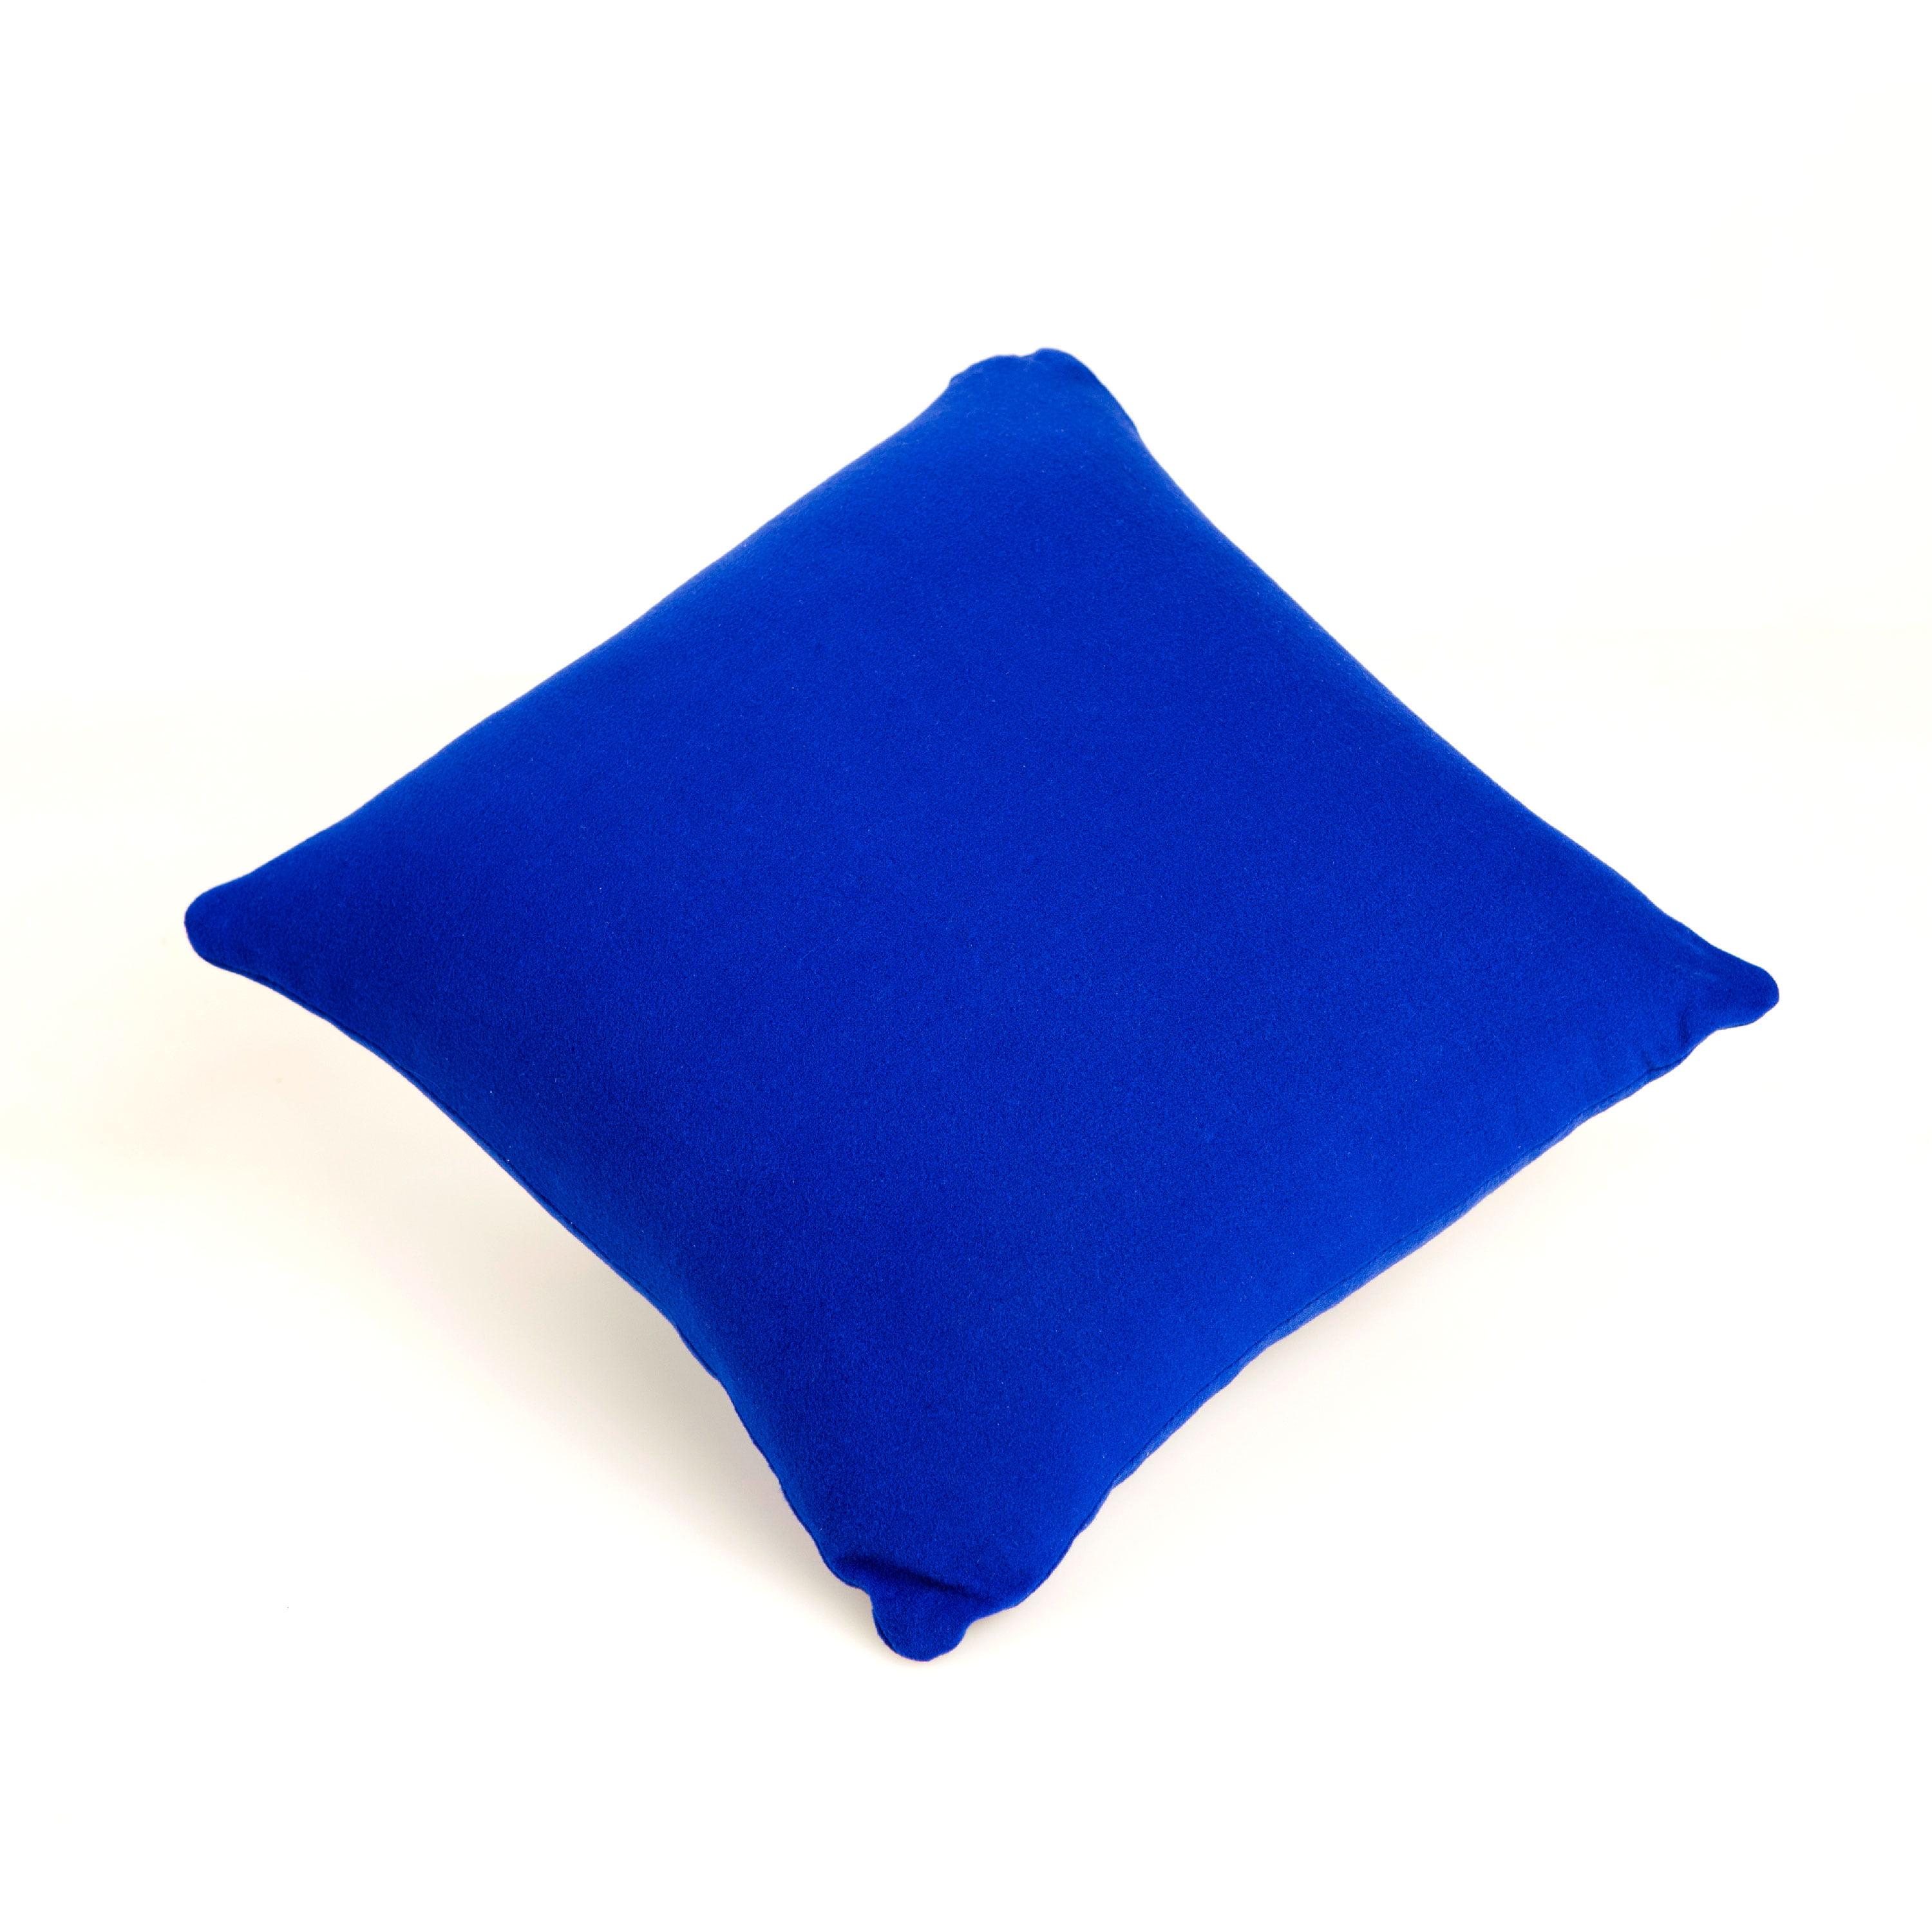 Cushie Pillows 11 inches x 11 inches Microbead Squishy//Flexible//Comfortable Square Pillow Black